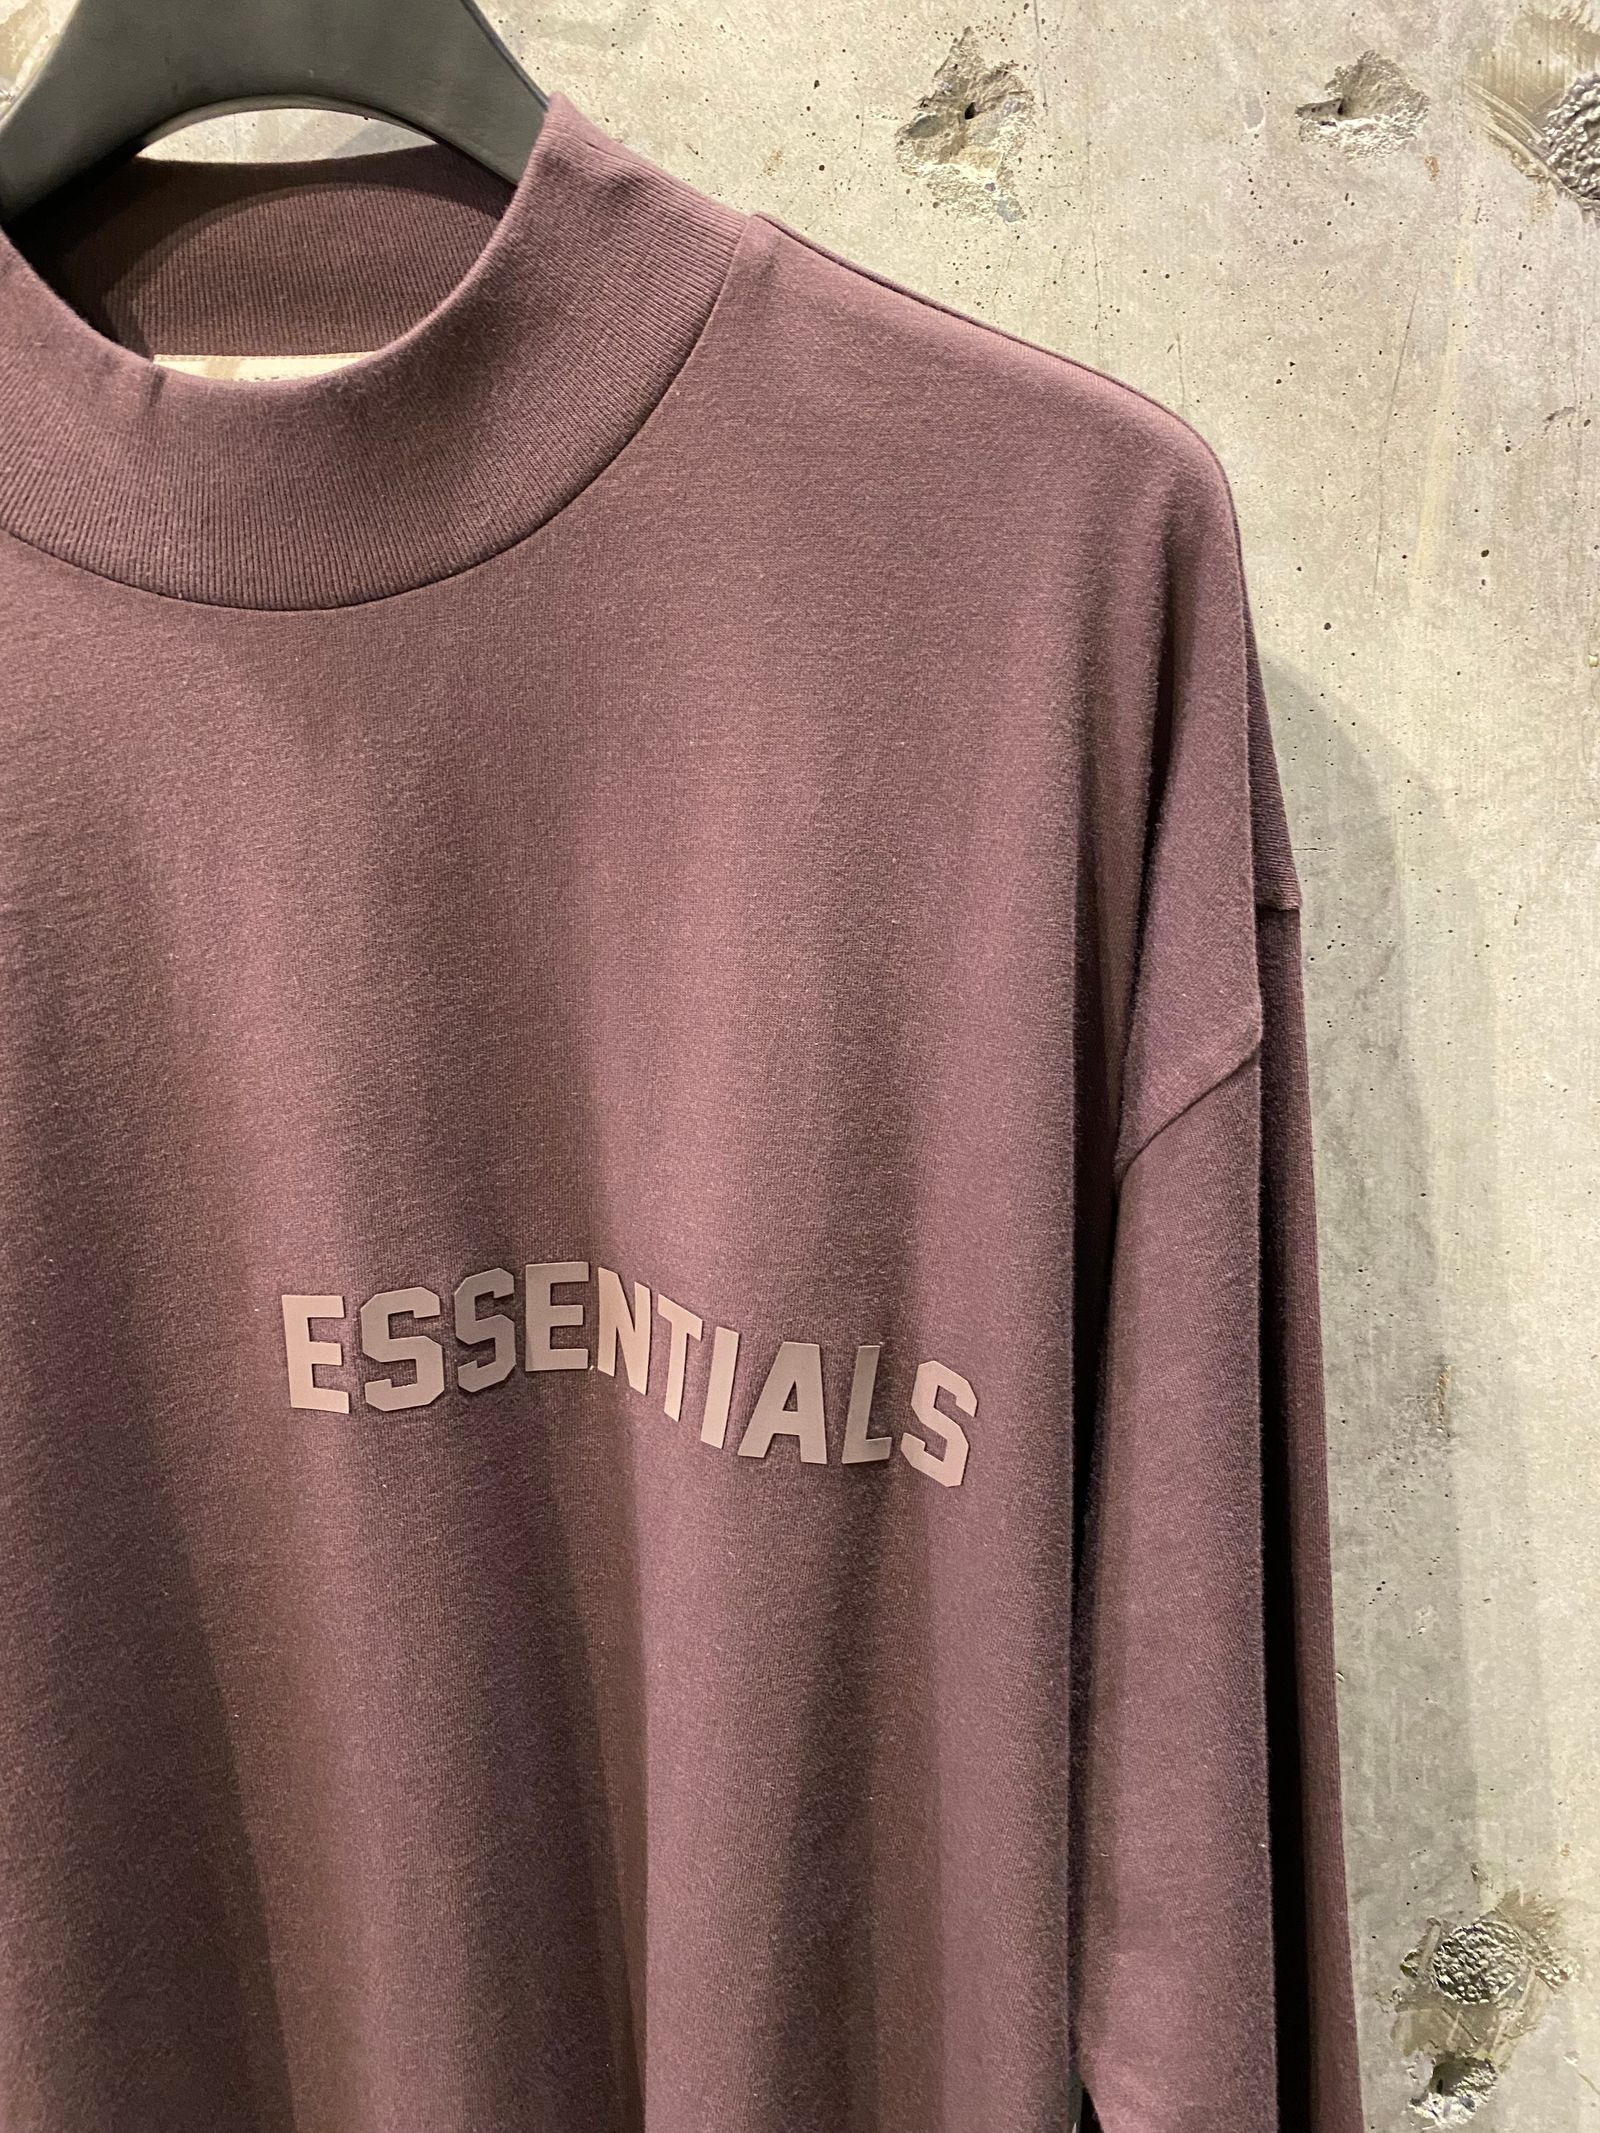 FOG ESSENTIALS - ESSENTIALS L/S Tshirt(PLUM) | R and another